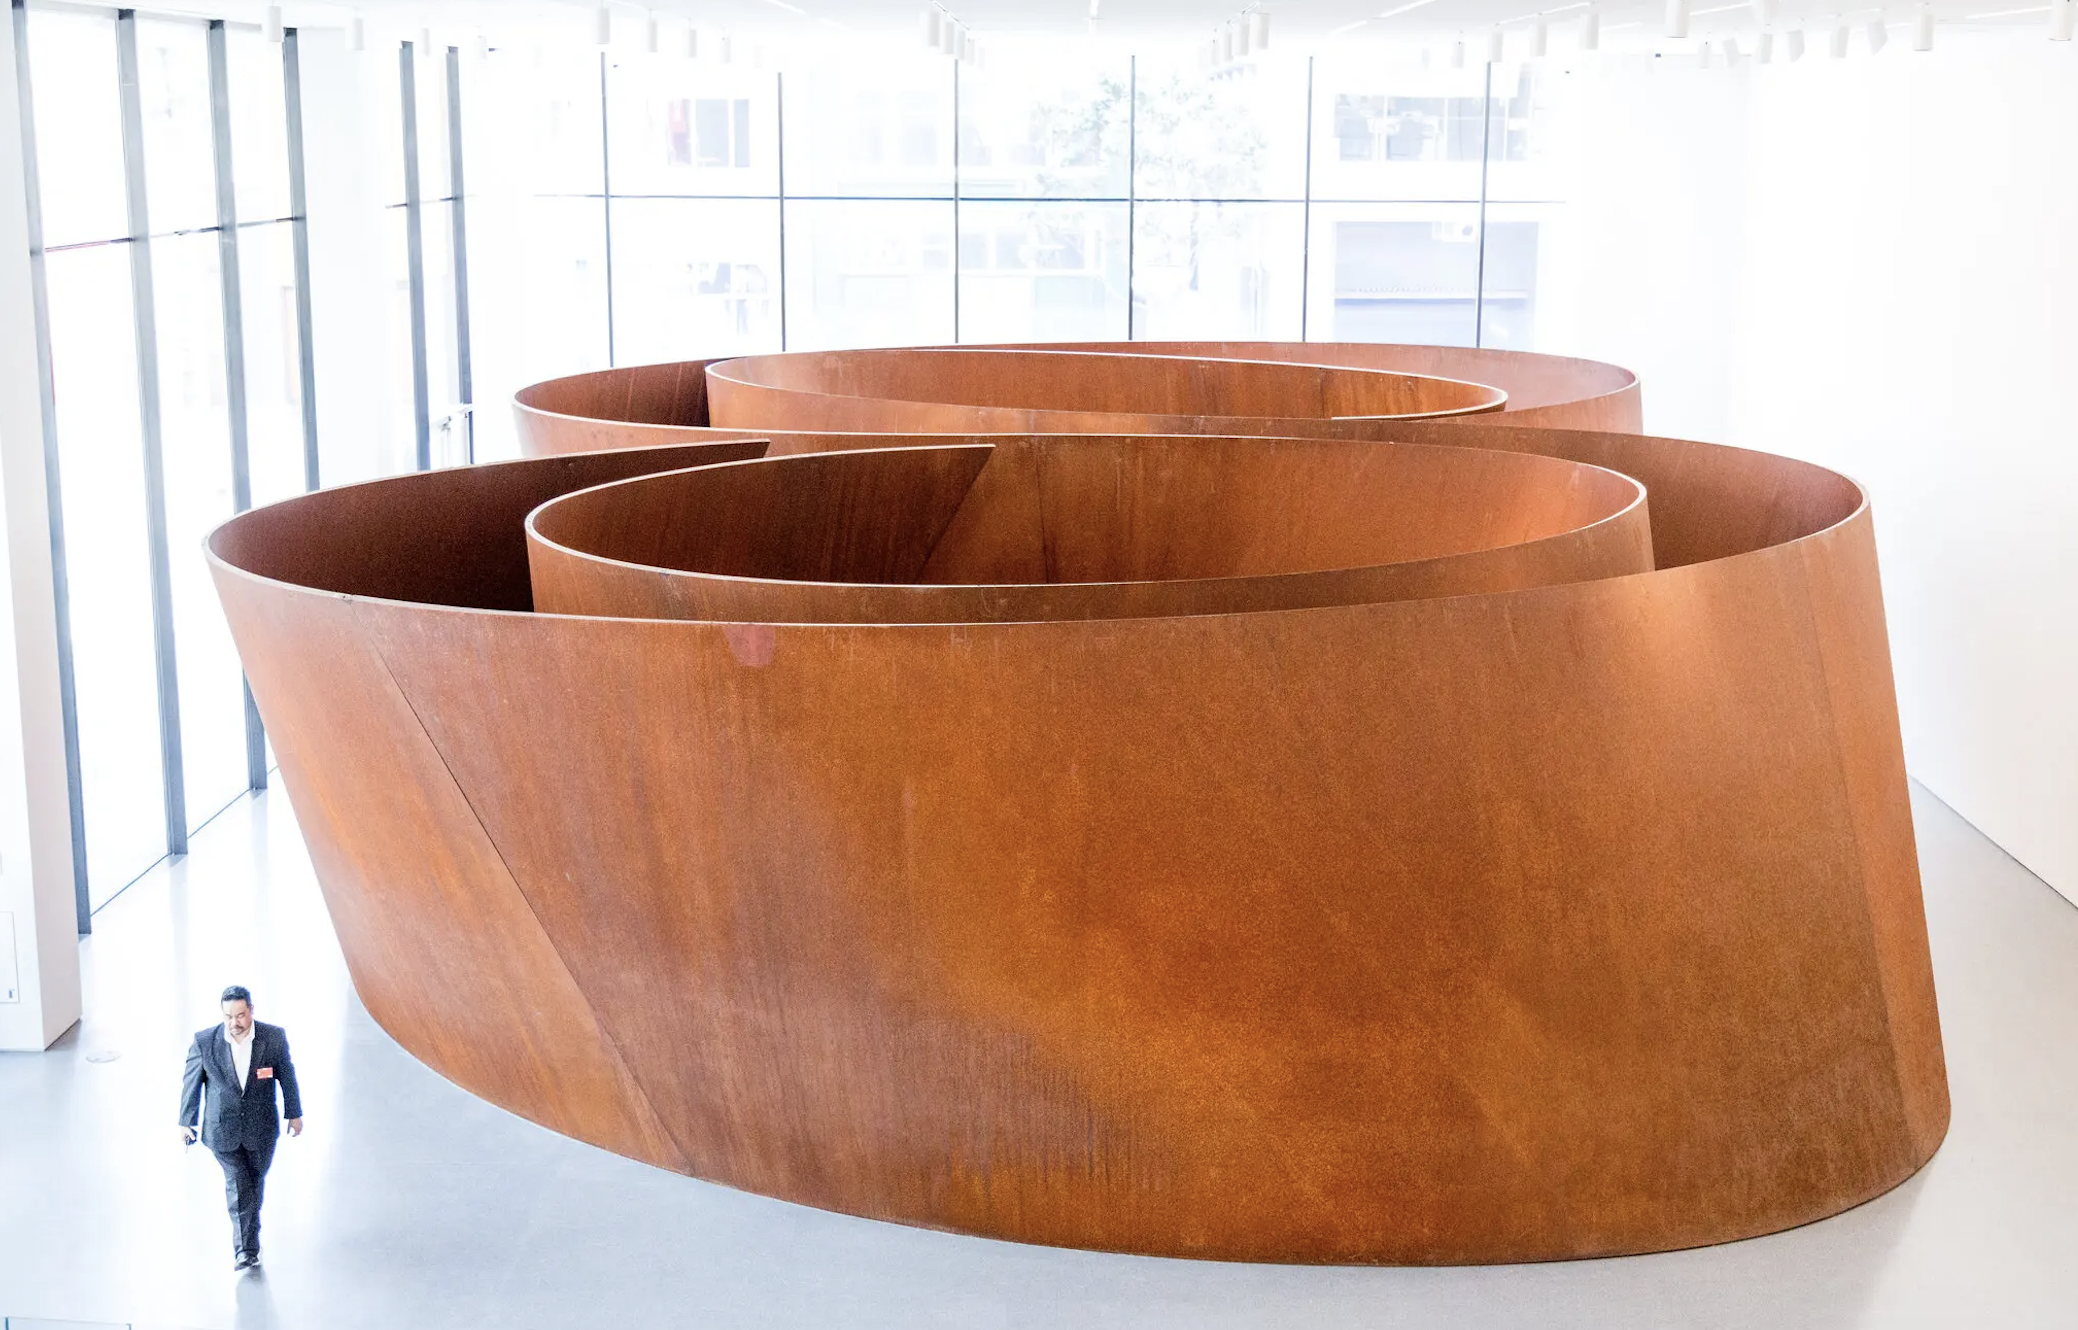 A Serra work at the San Francisco Museum of Modern Art in 2016.Credit...Richard Serra/Artists Rights Society (ARS), New York. Photo: Jason Henry for The New York Times